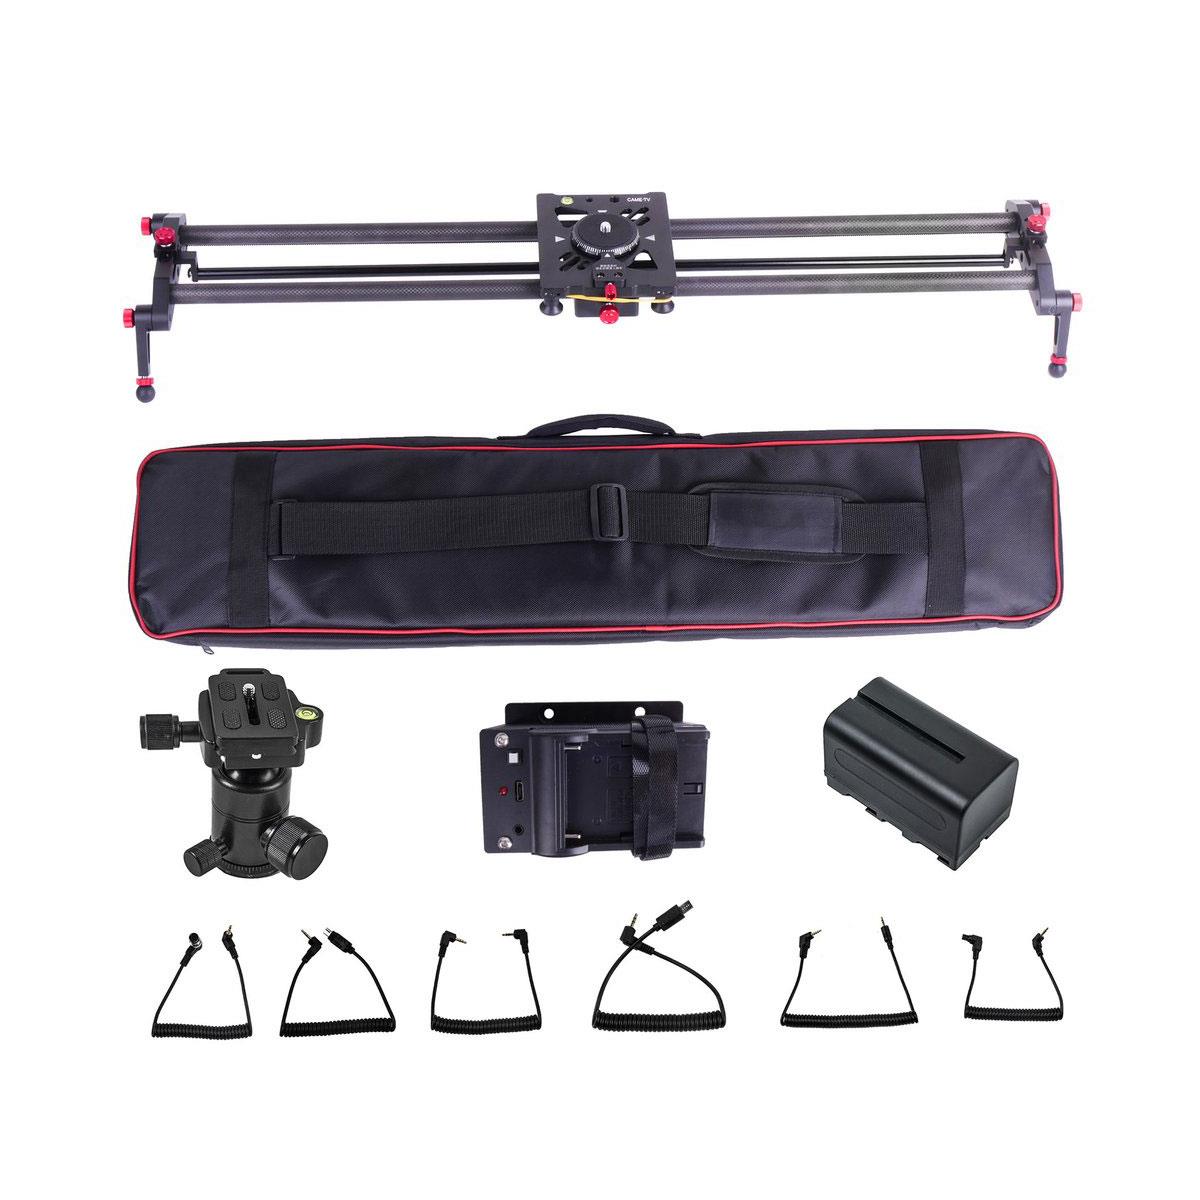 Image of Came-TV 100cm Motorized Parallax Slider with Bluetooth